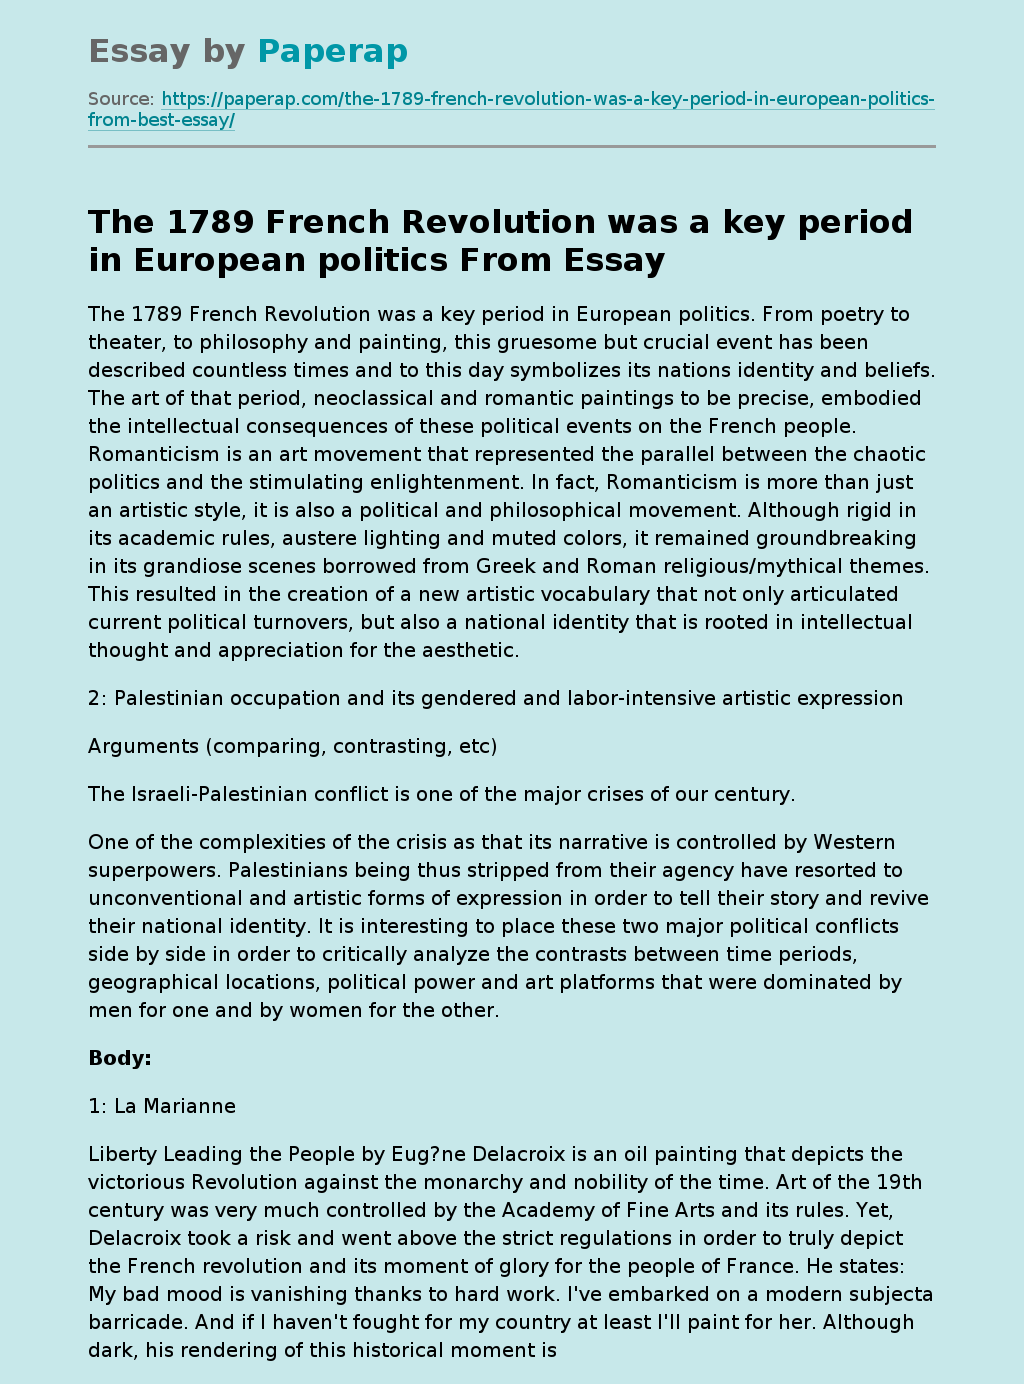 Impact of French Revolution on Art